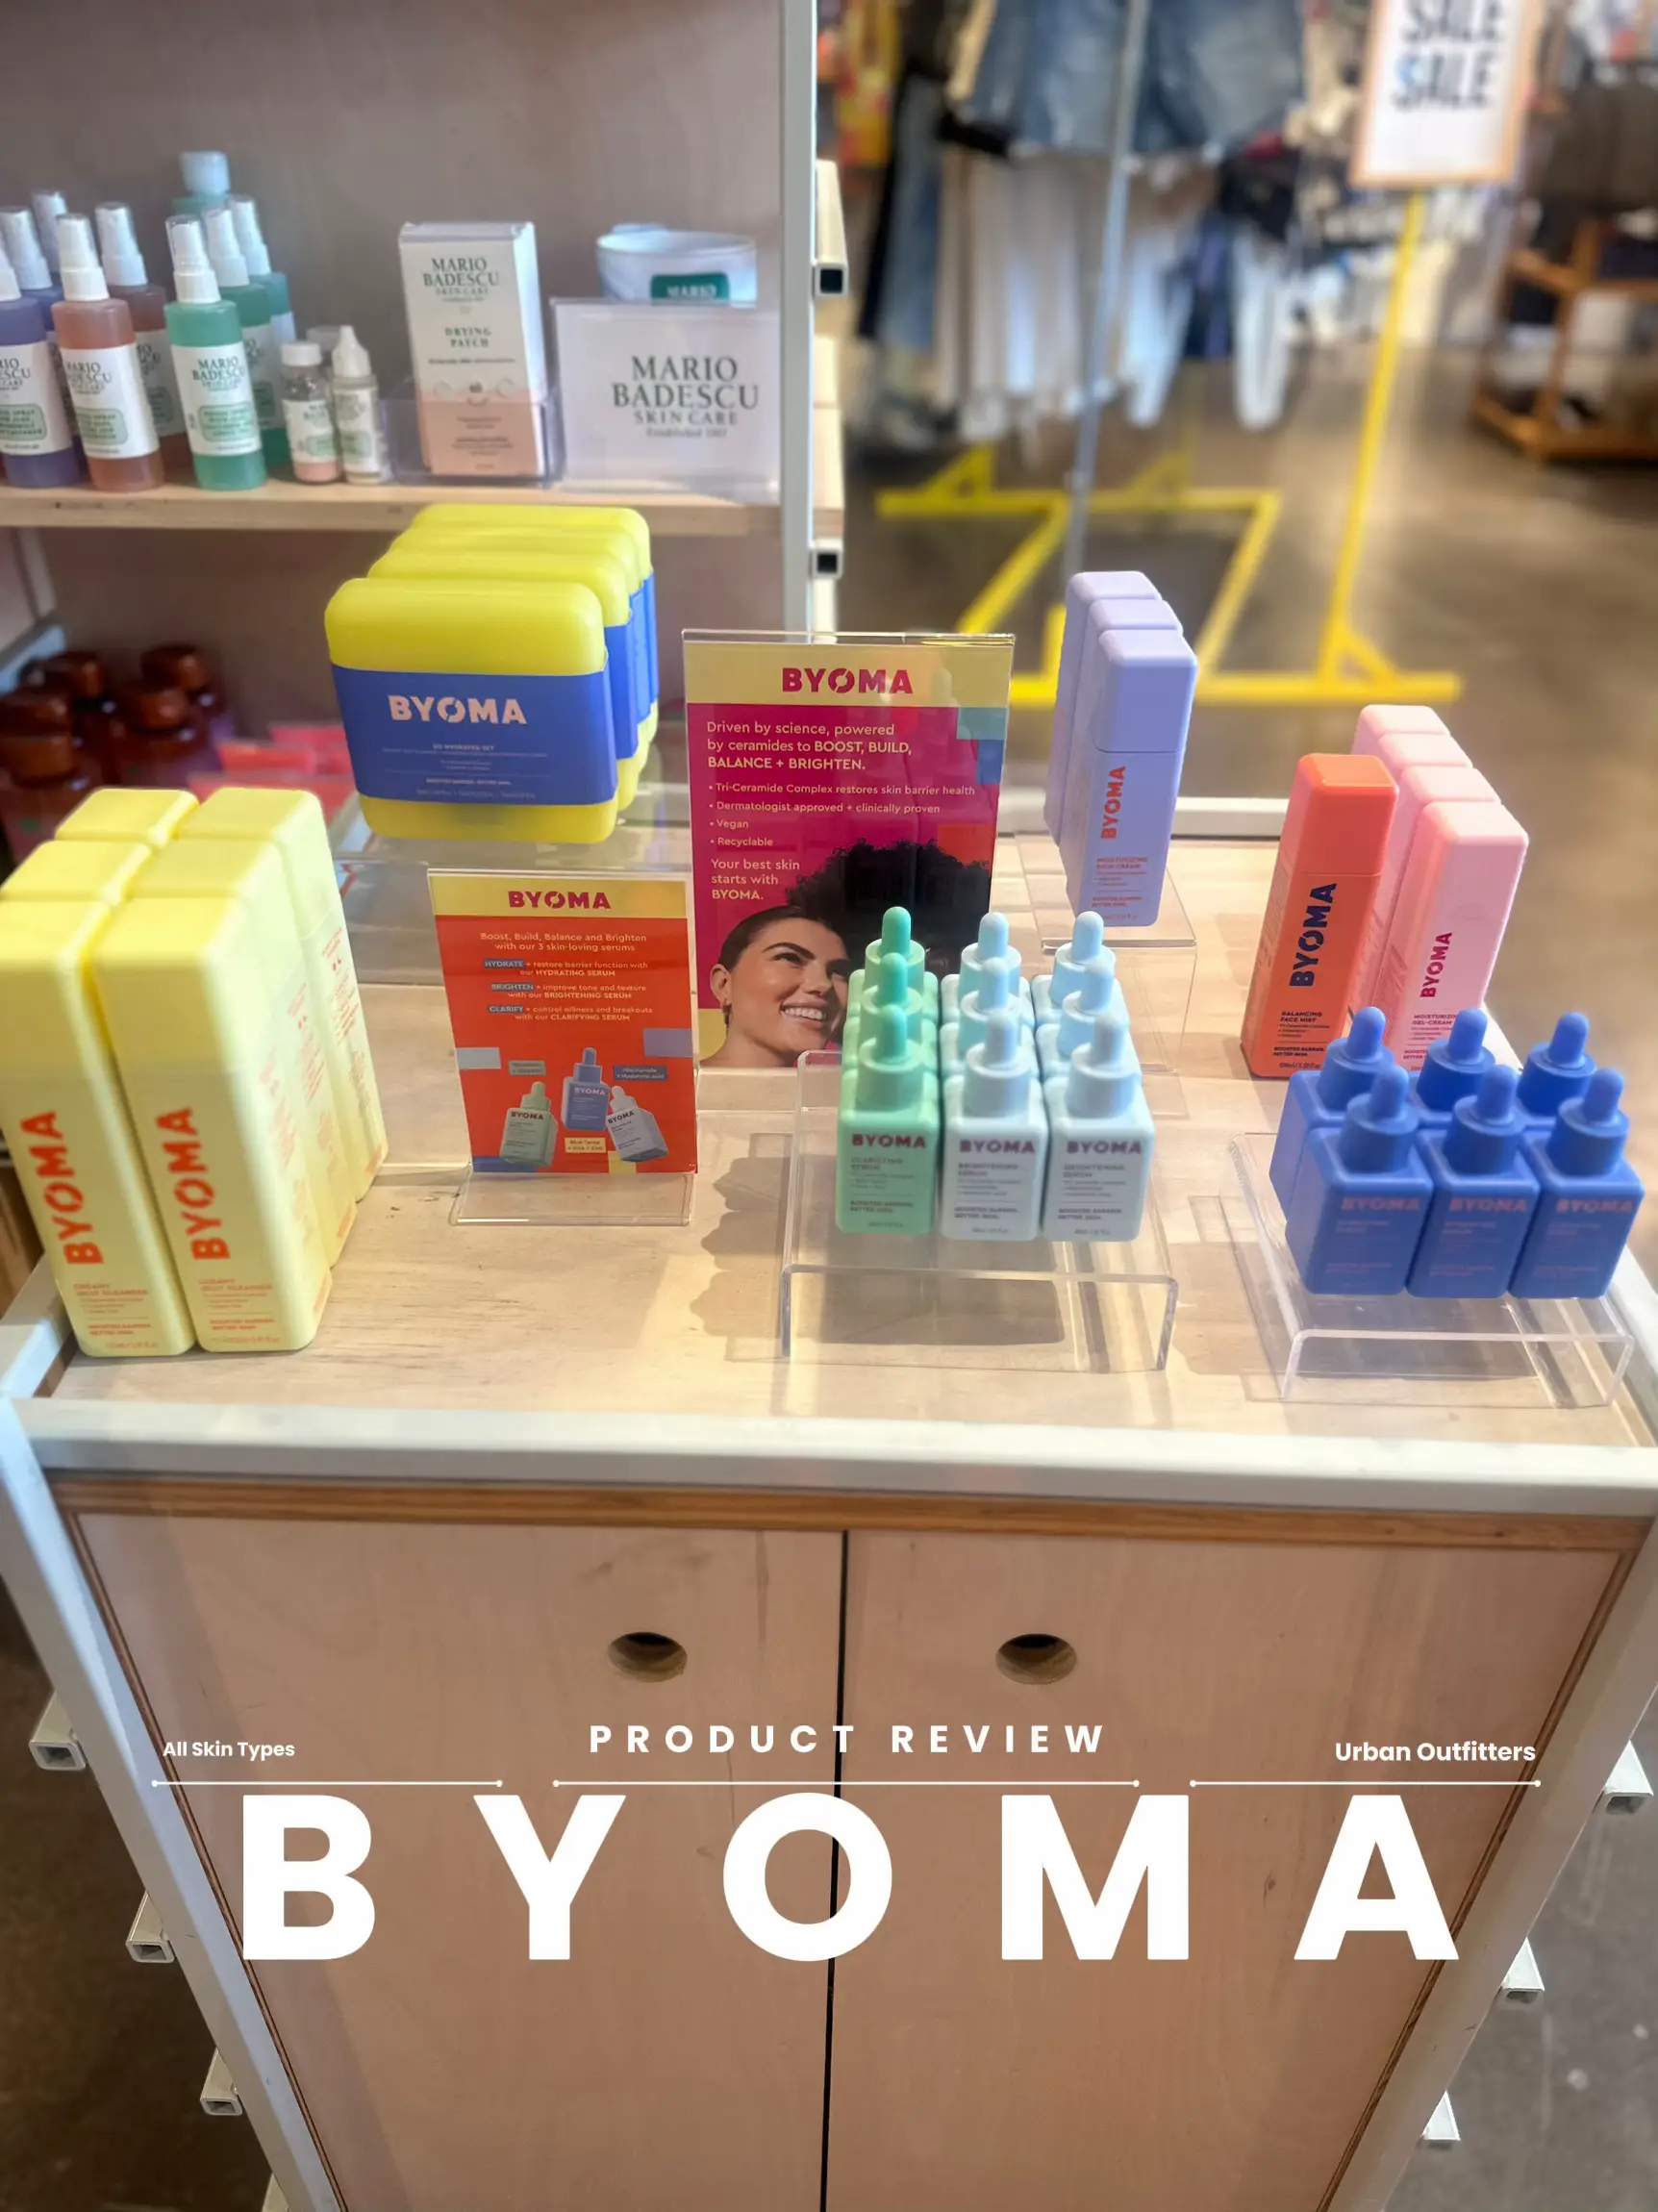 5 BYOMA SKINCARE FAVES 🫶🏼, Gallery posted by VictoriaGracexo